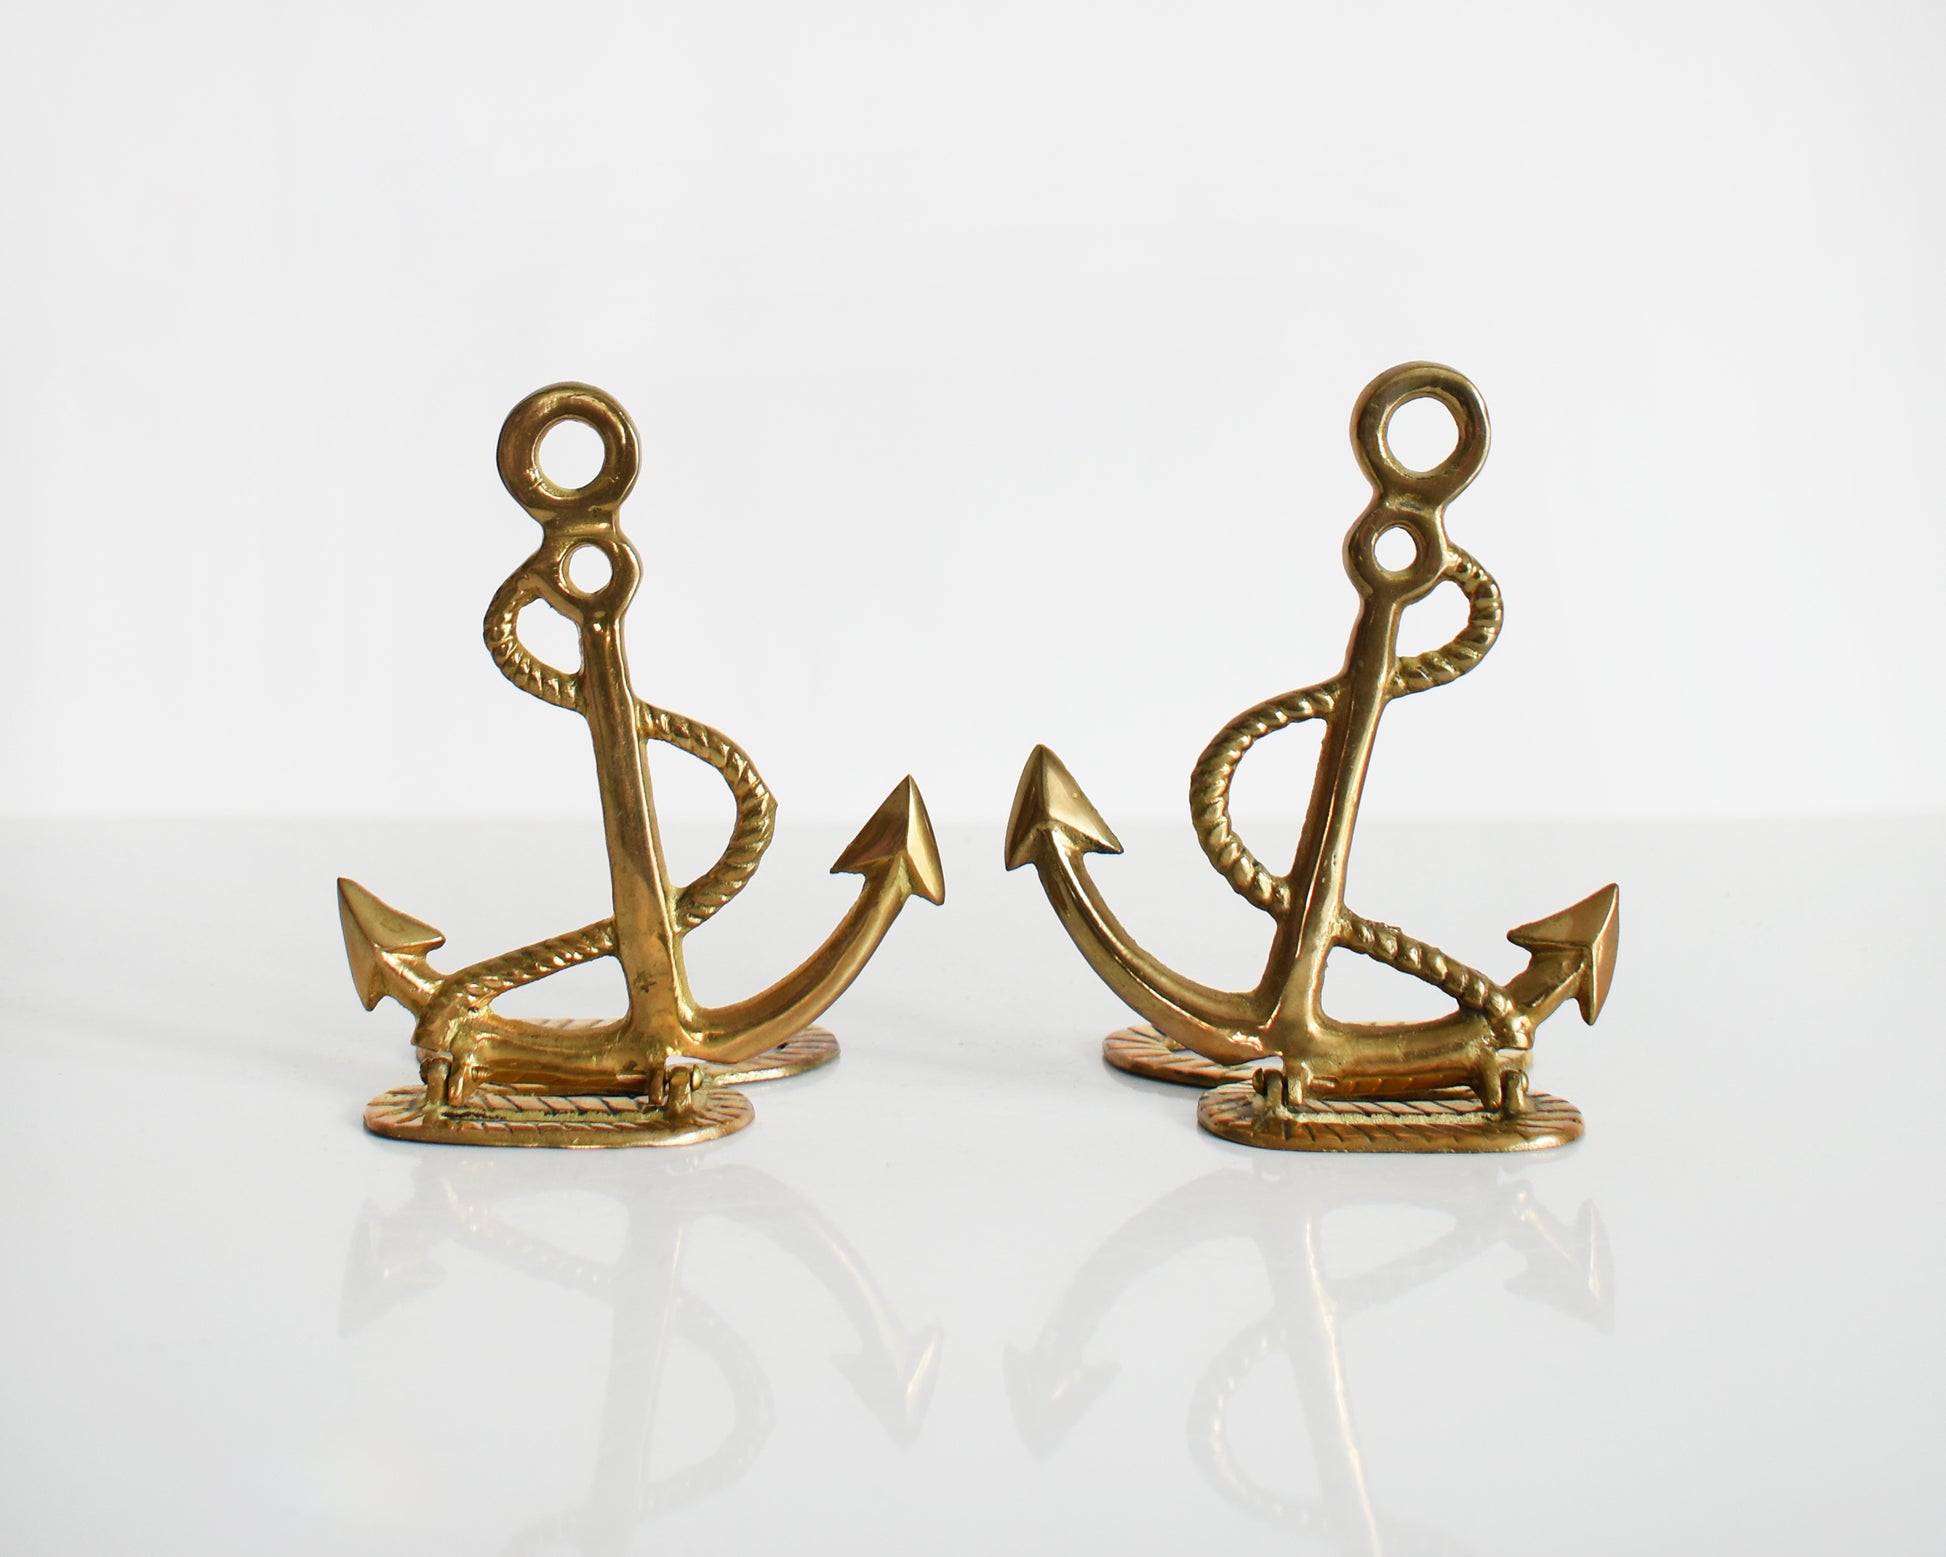 Two vintage brass anchor and rope bookends.